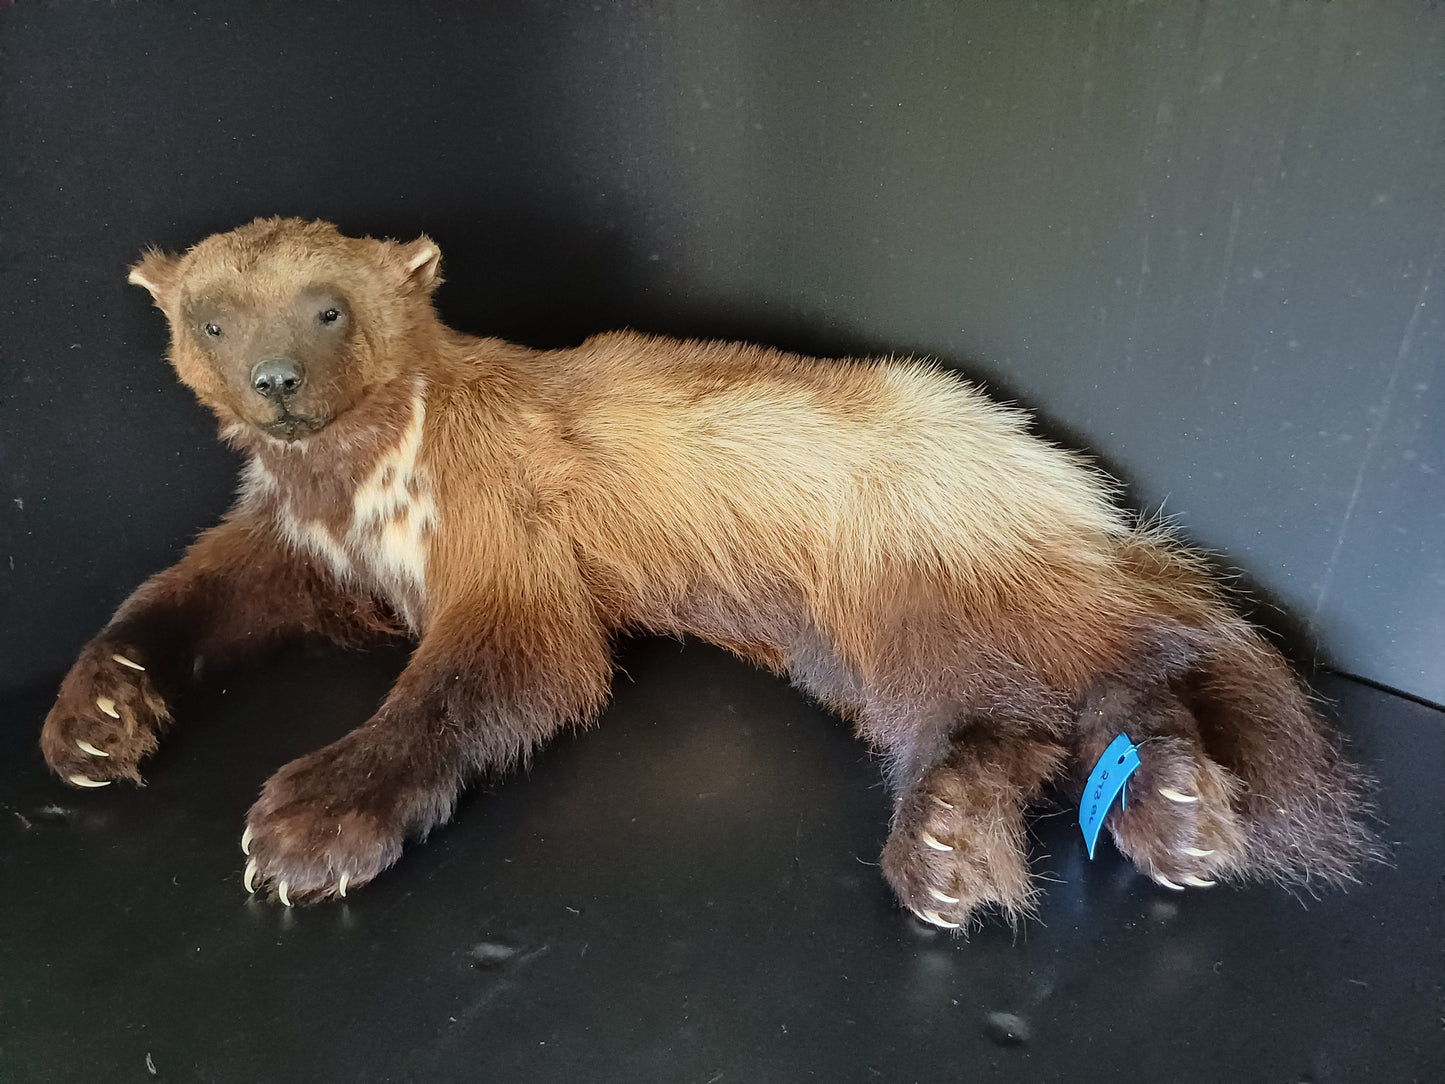 Large wolverine full taxidermy mount